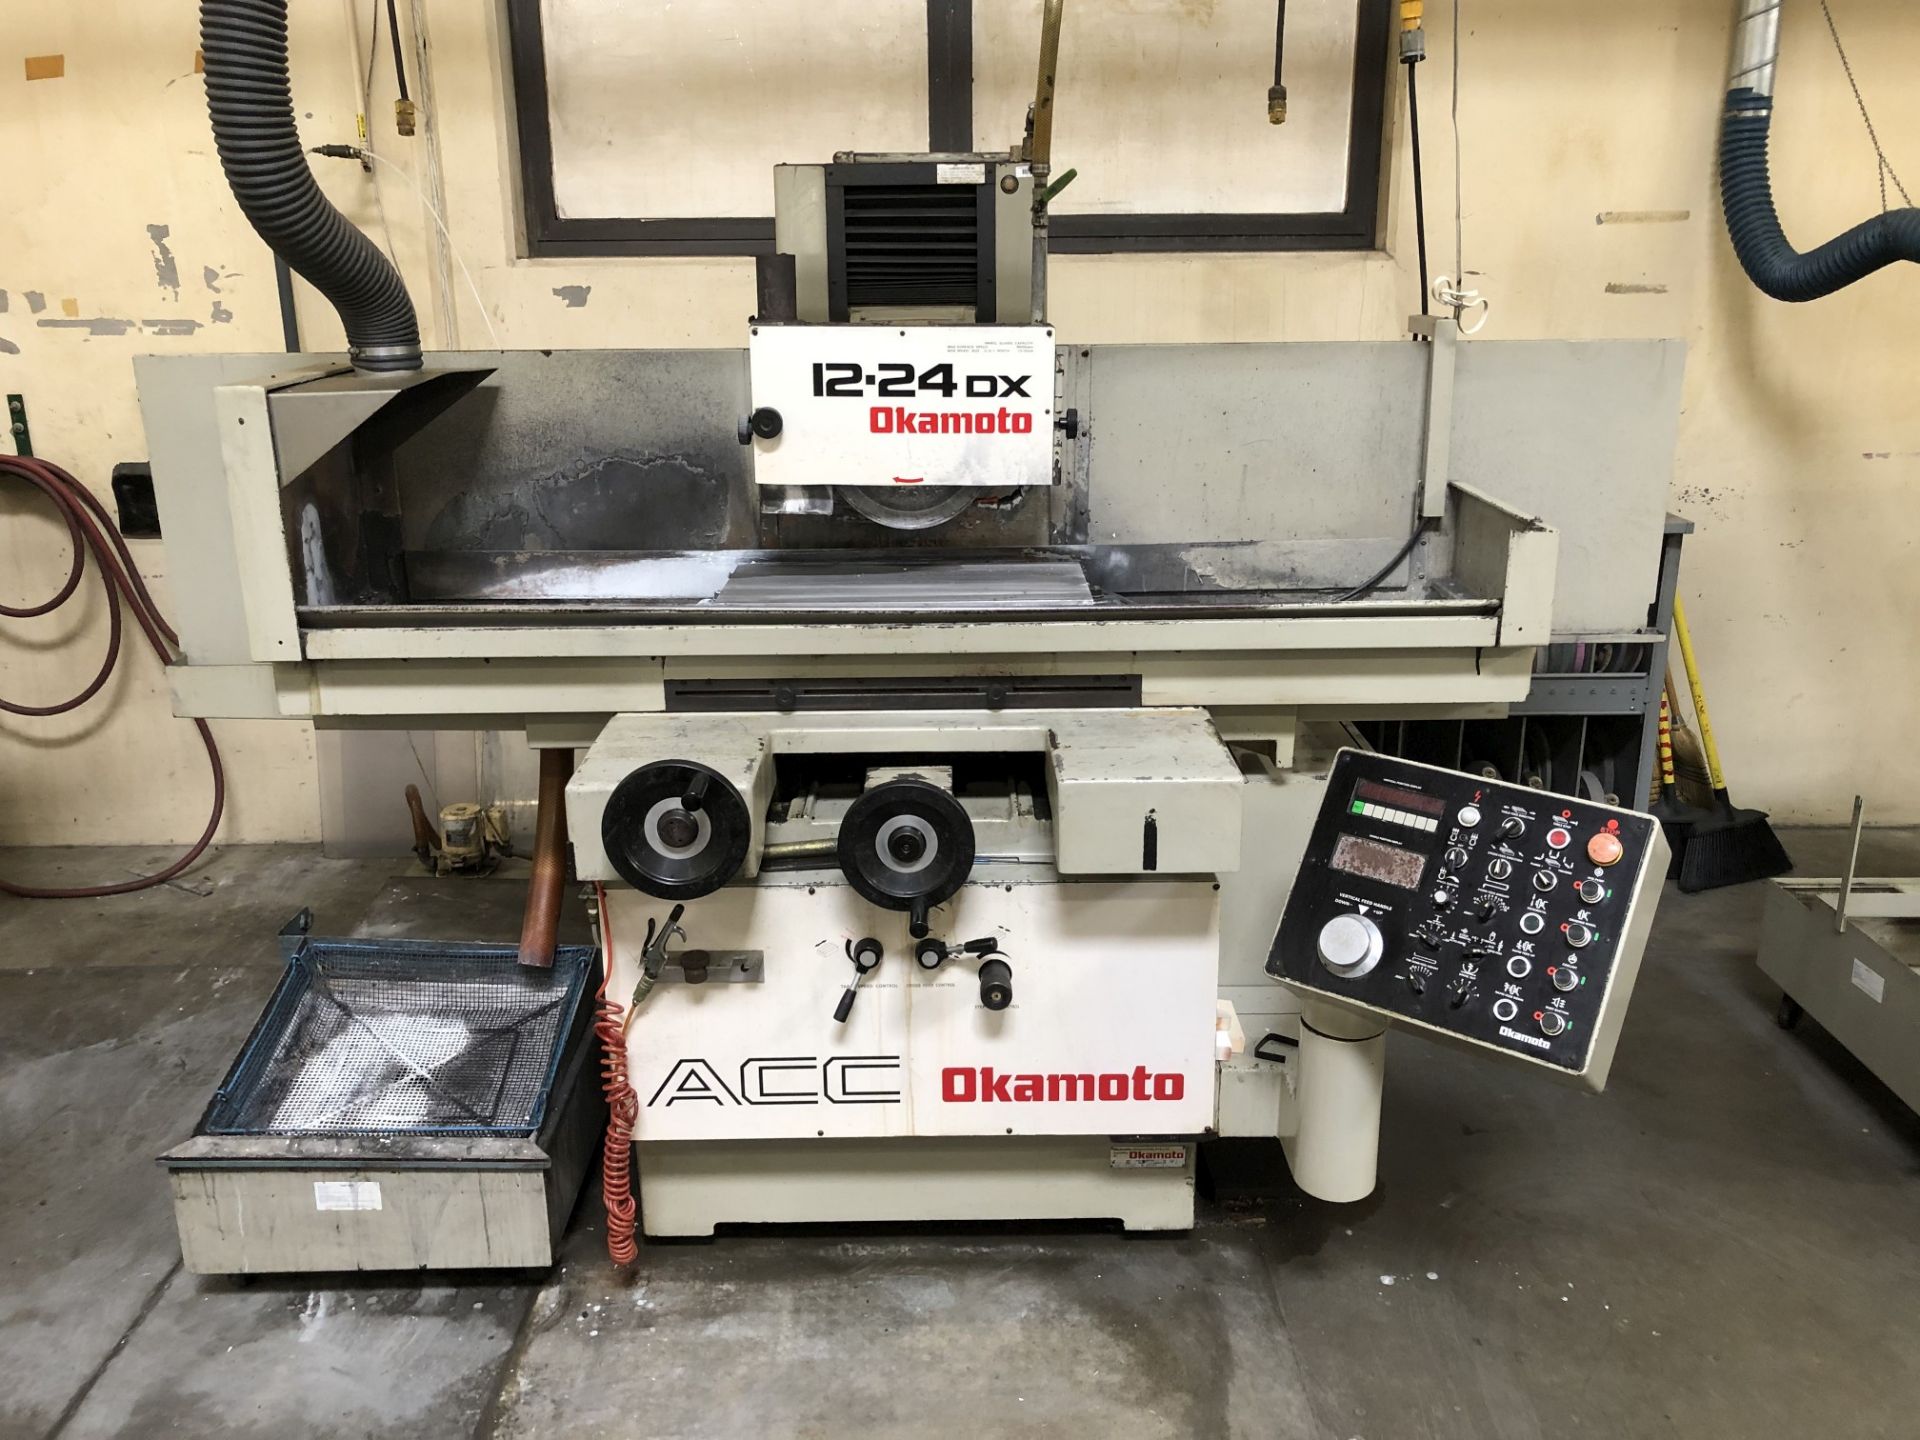 Okamoto ACC-12-24DX Surface Grinder, 12" x 24" Electro Magnetic Chuck, S/N 63793 (SPT #21)